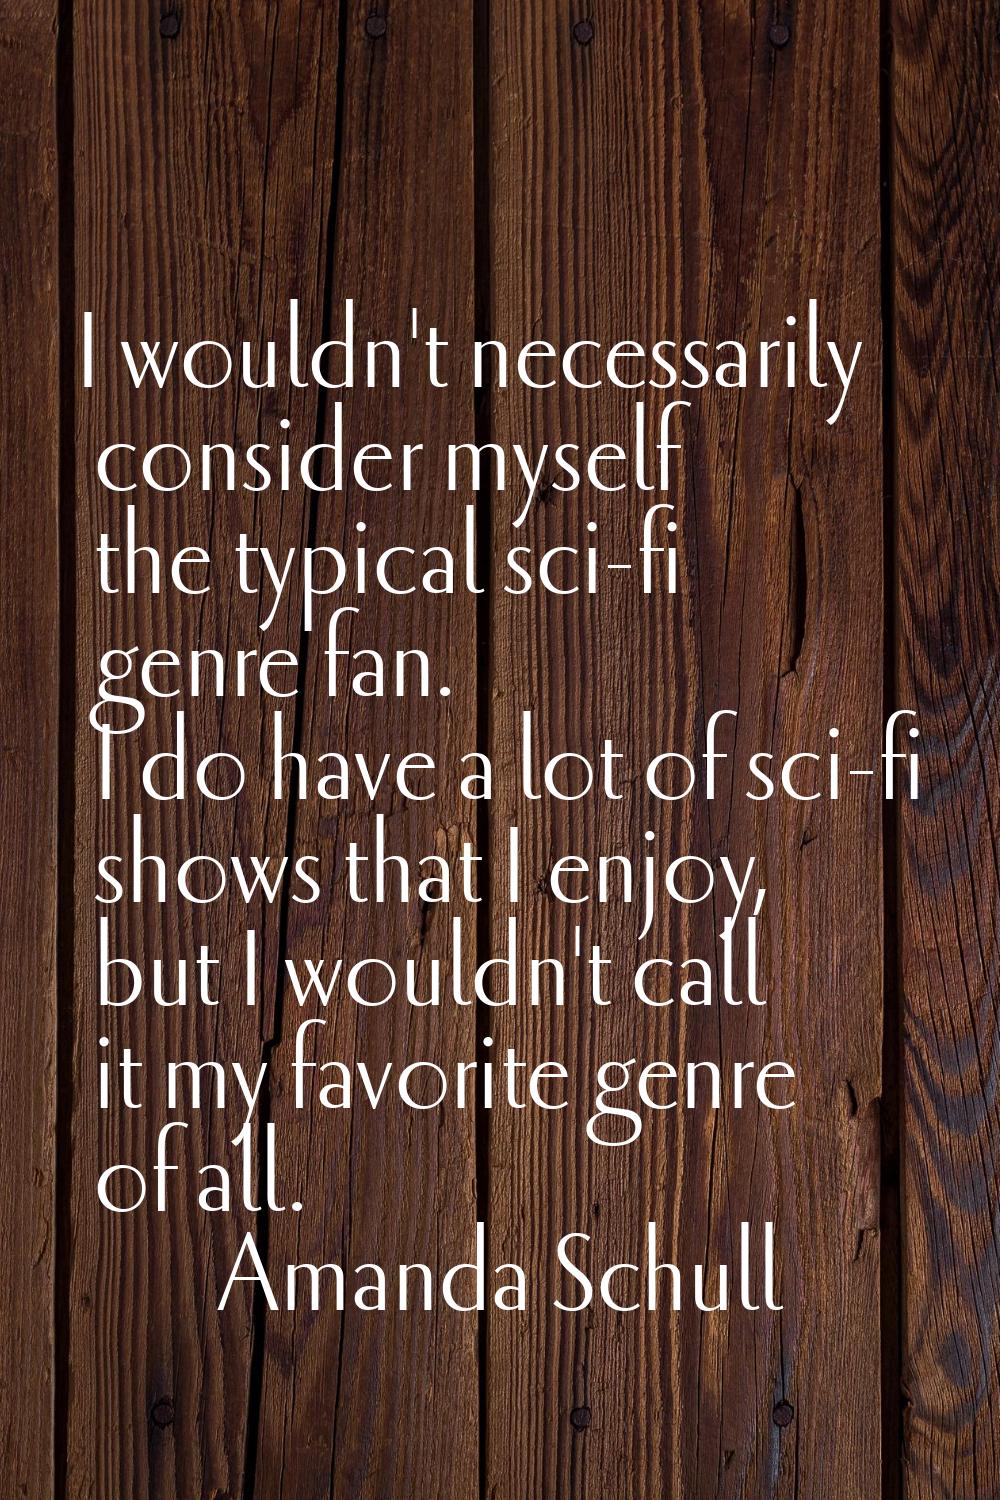 I wouldn't necessarily consider myself the typical sci-fi genre fan. I do have a lot of sci-fi show